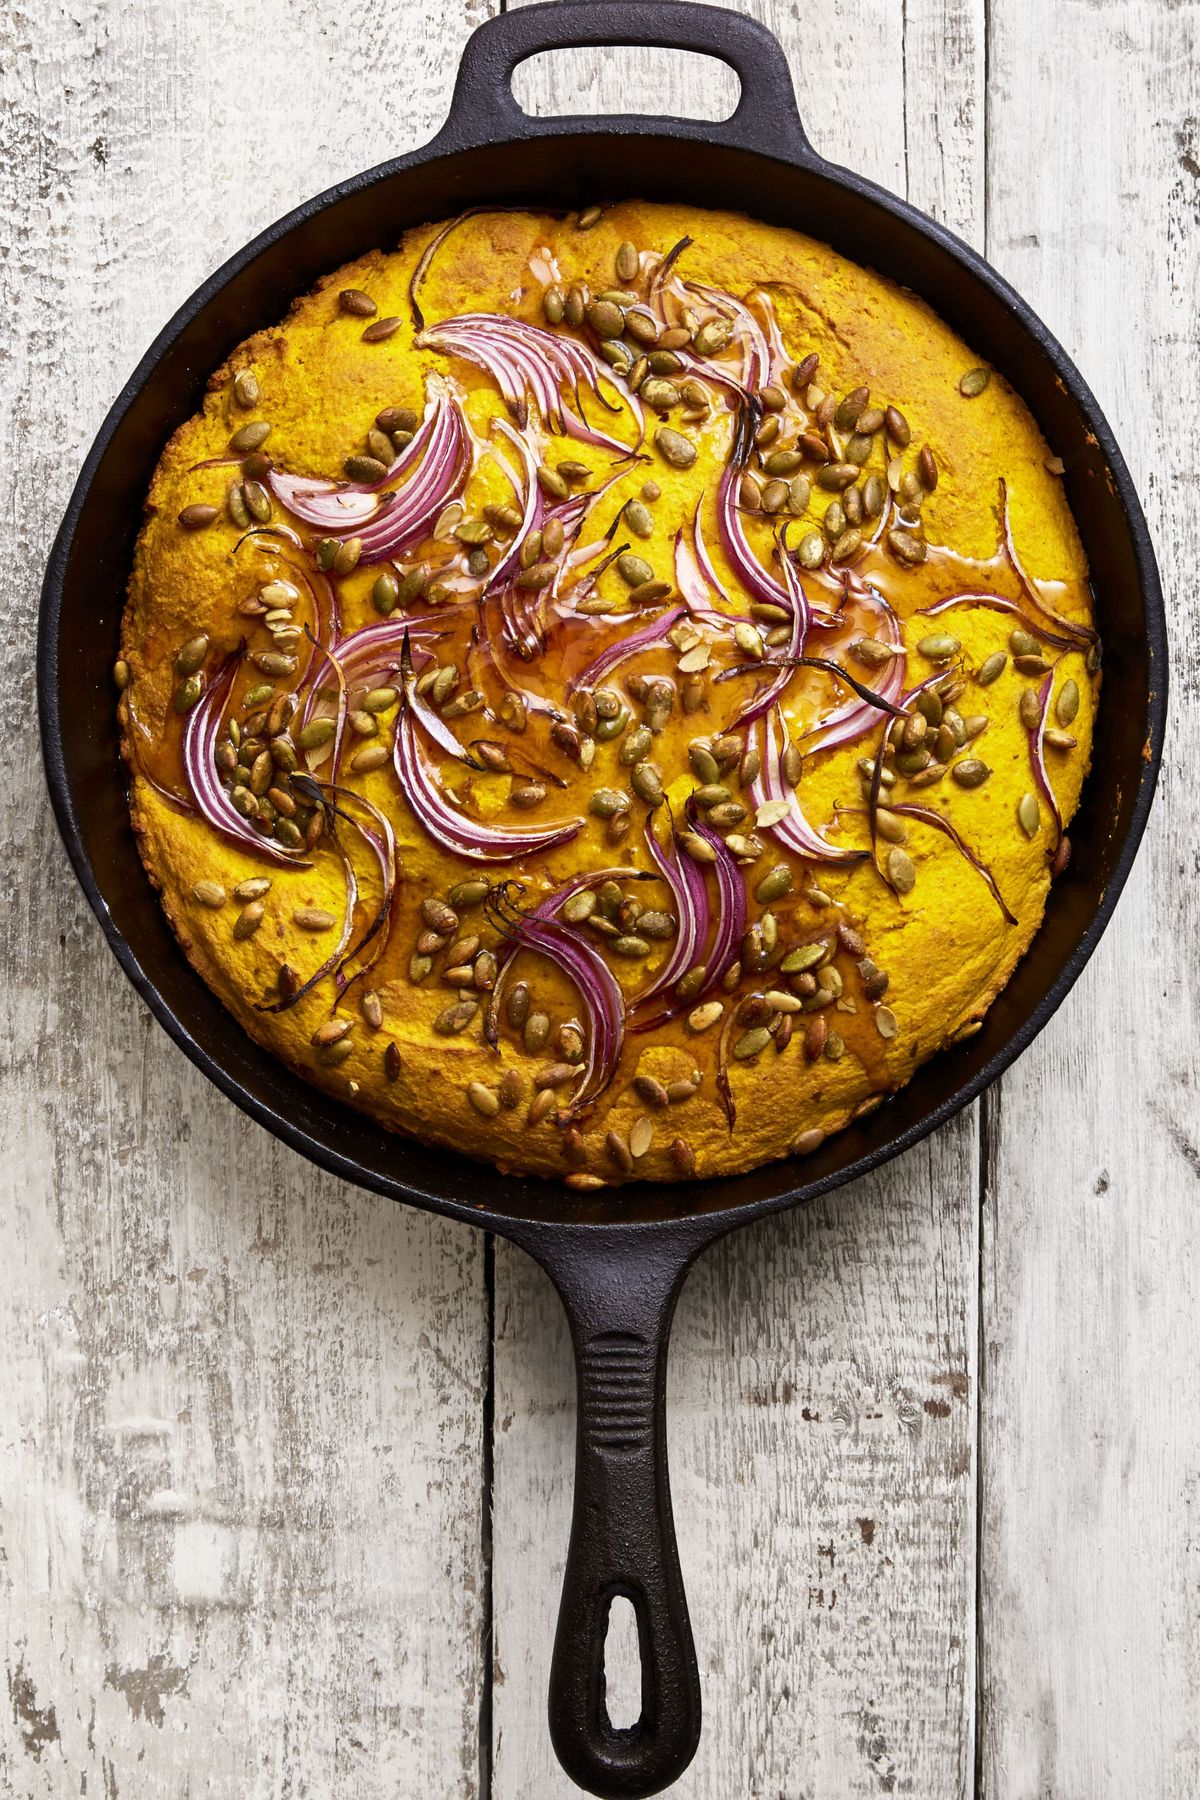 baked cornbread with red onion in a cast iron skillet